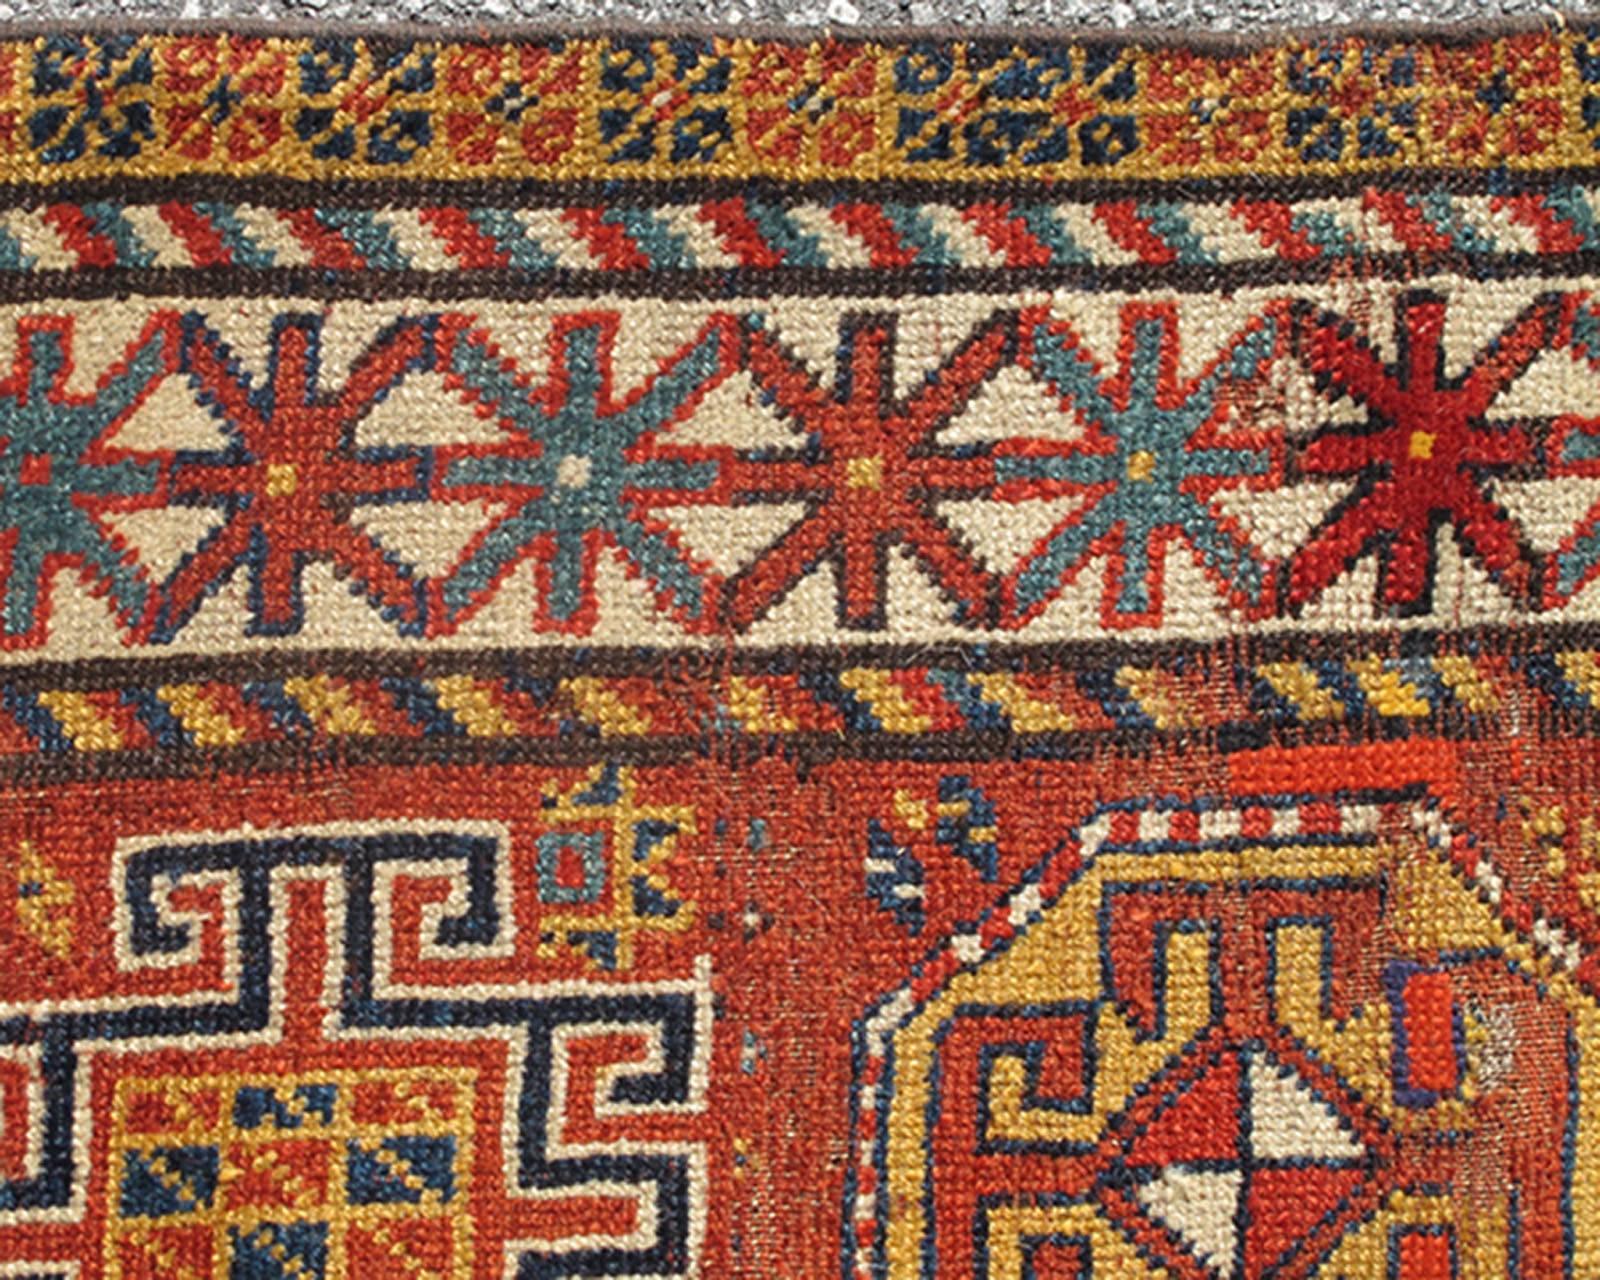 Late 19th Century Unique Antique Qashqai Rug with Geometric Motifs in Red, Blue, and Golden Yellow For Sale